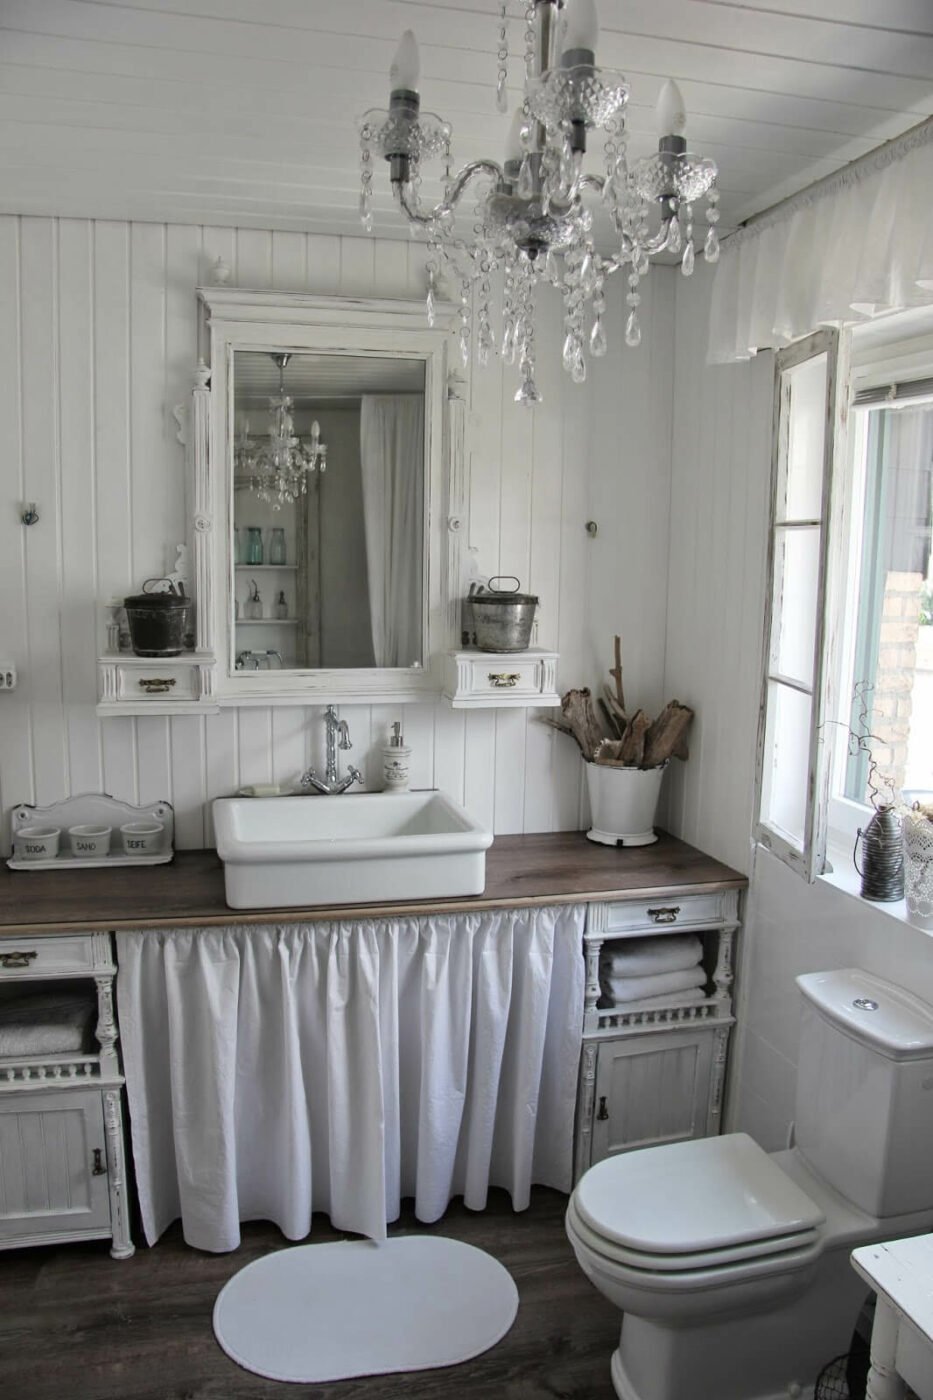 Shabby Chic Bathroom Design with Ruffle Details